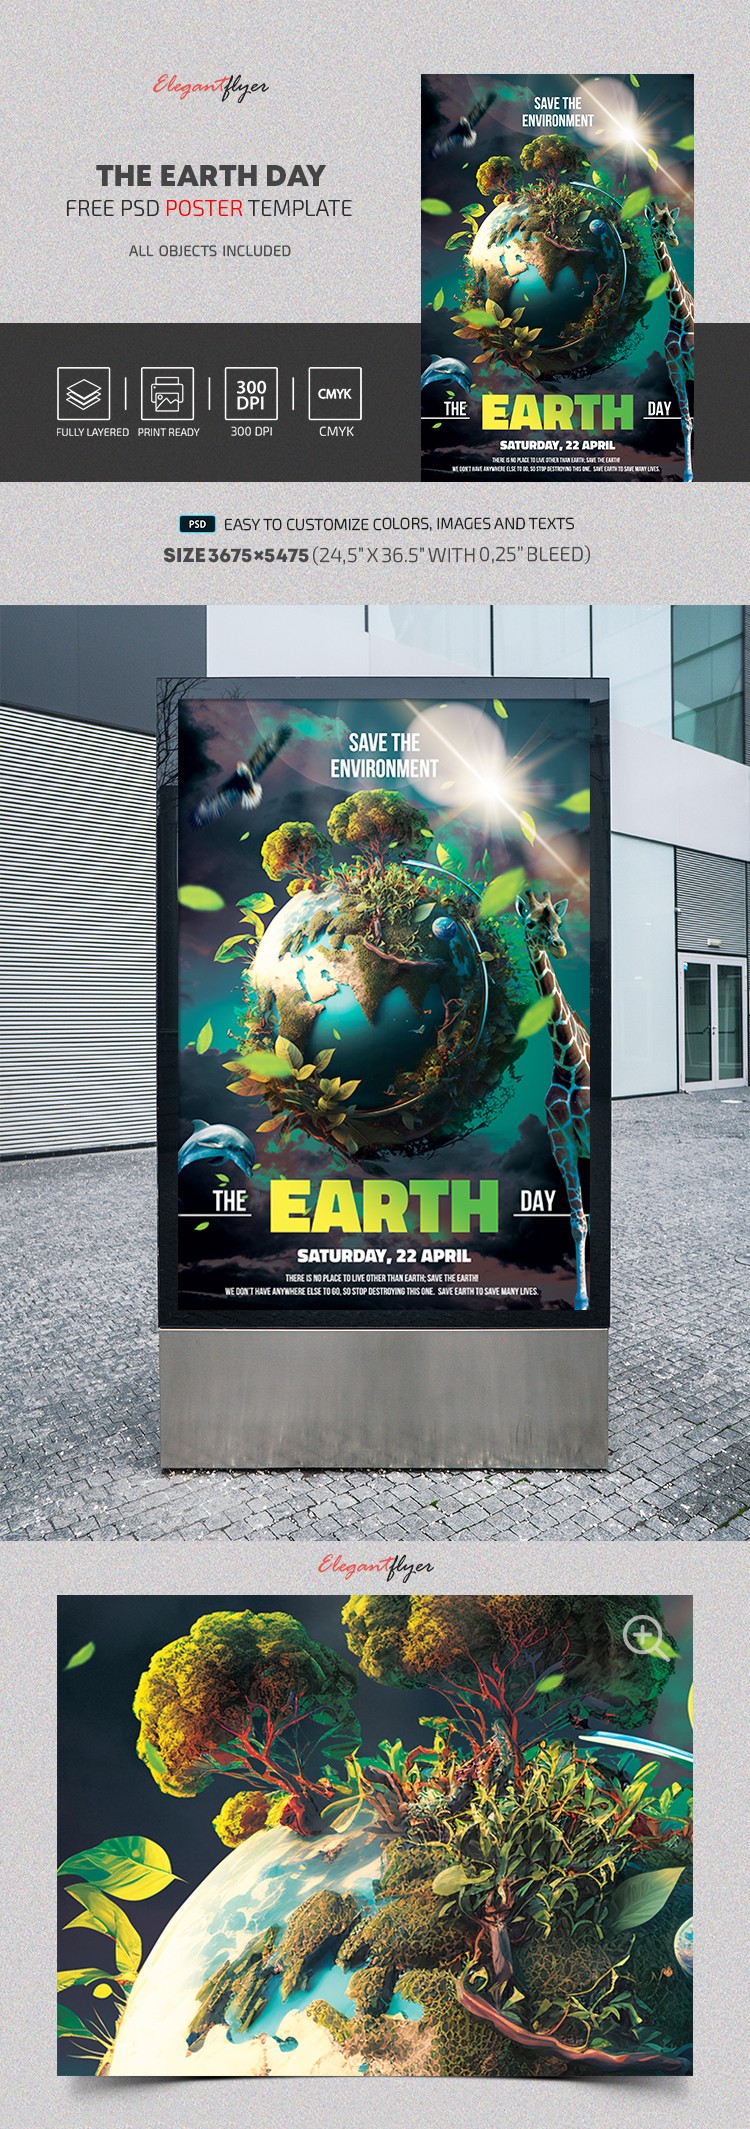 Earth Day - Free PSD Poster Template by ElegantFlyer